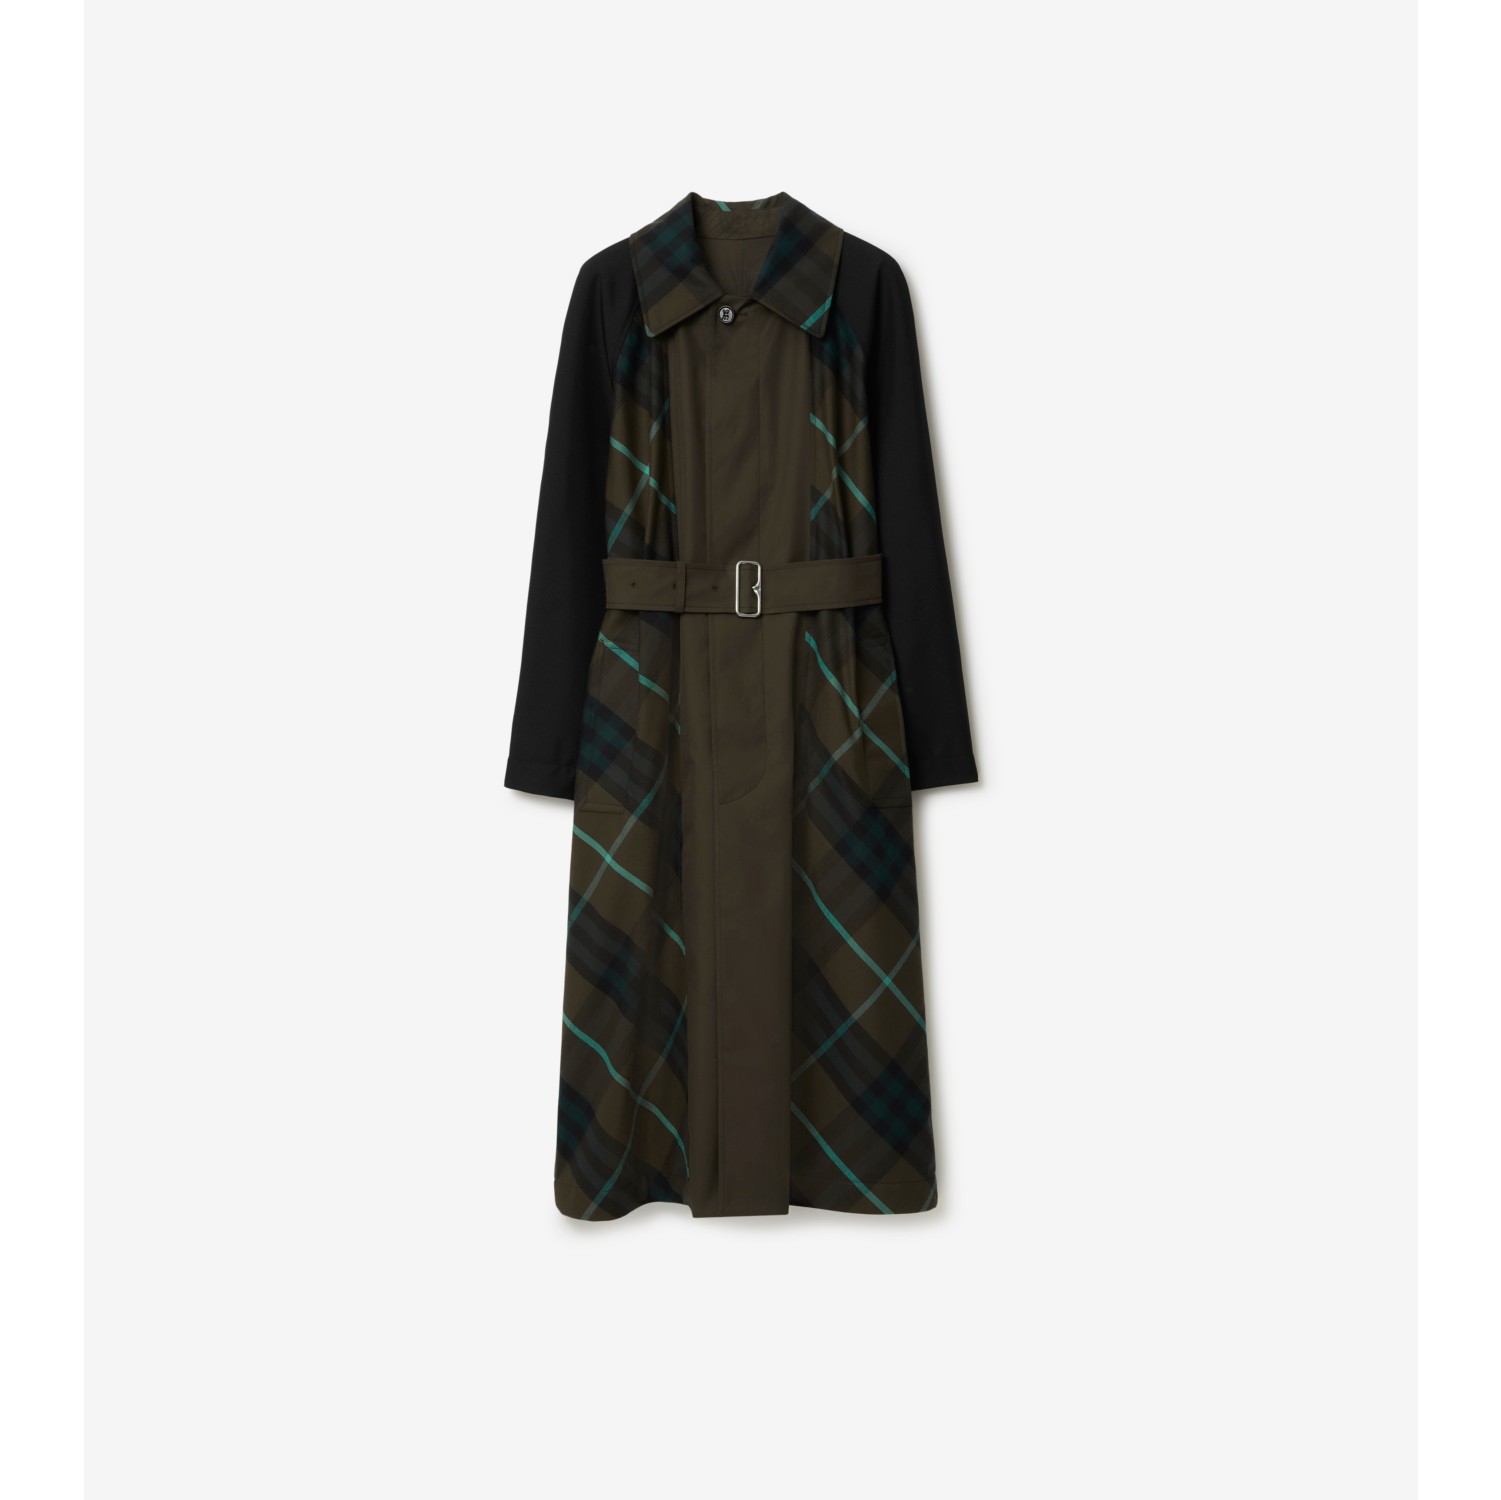 Burberry Check Reversible Trench Coat in Green - Burberry